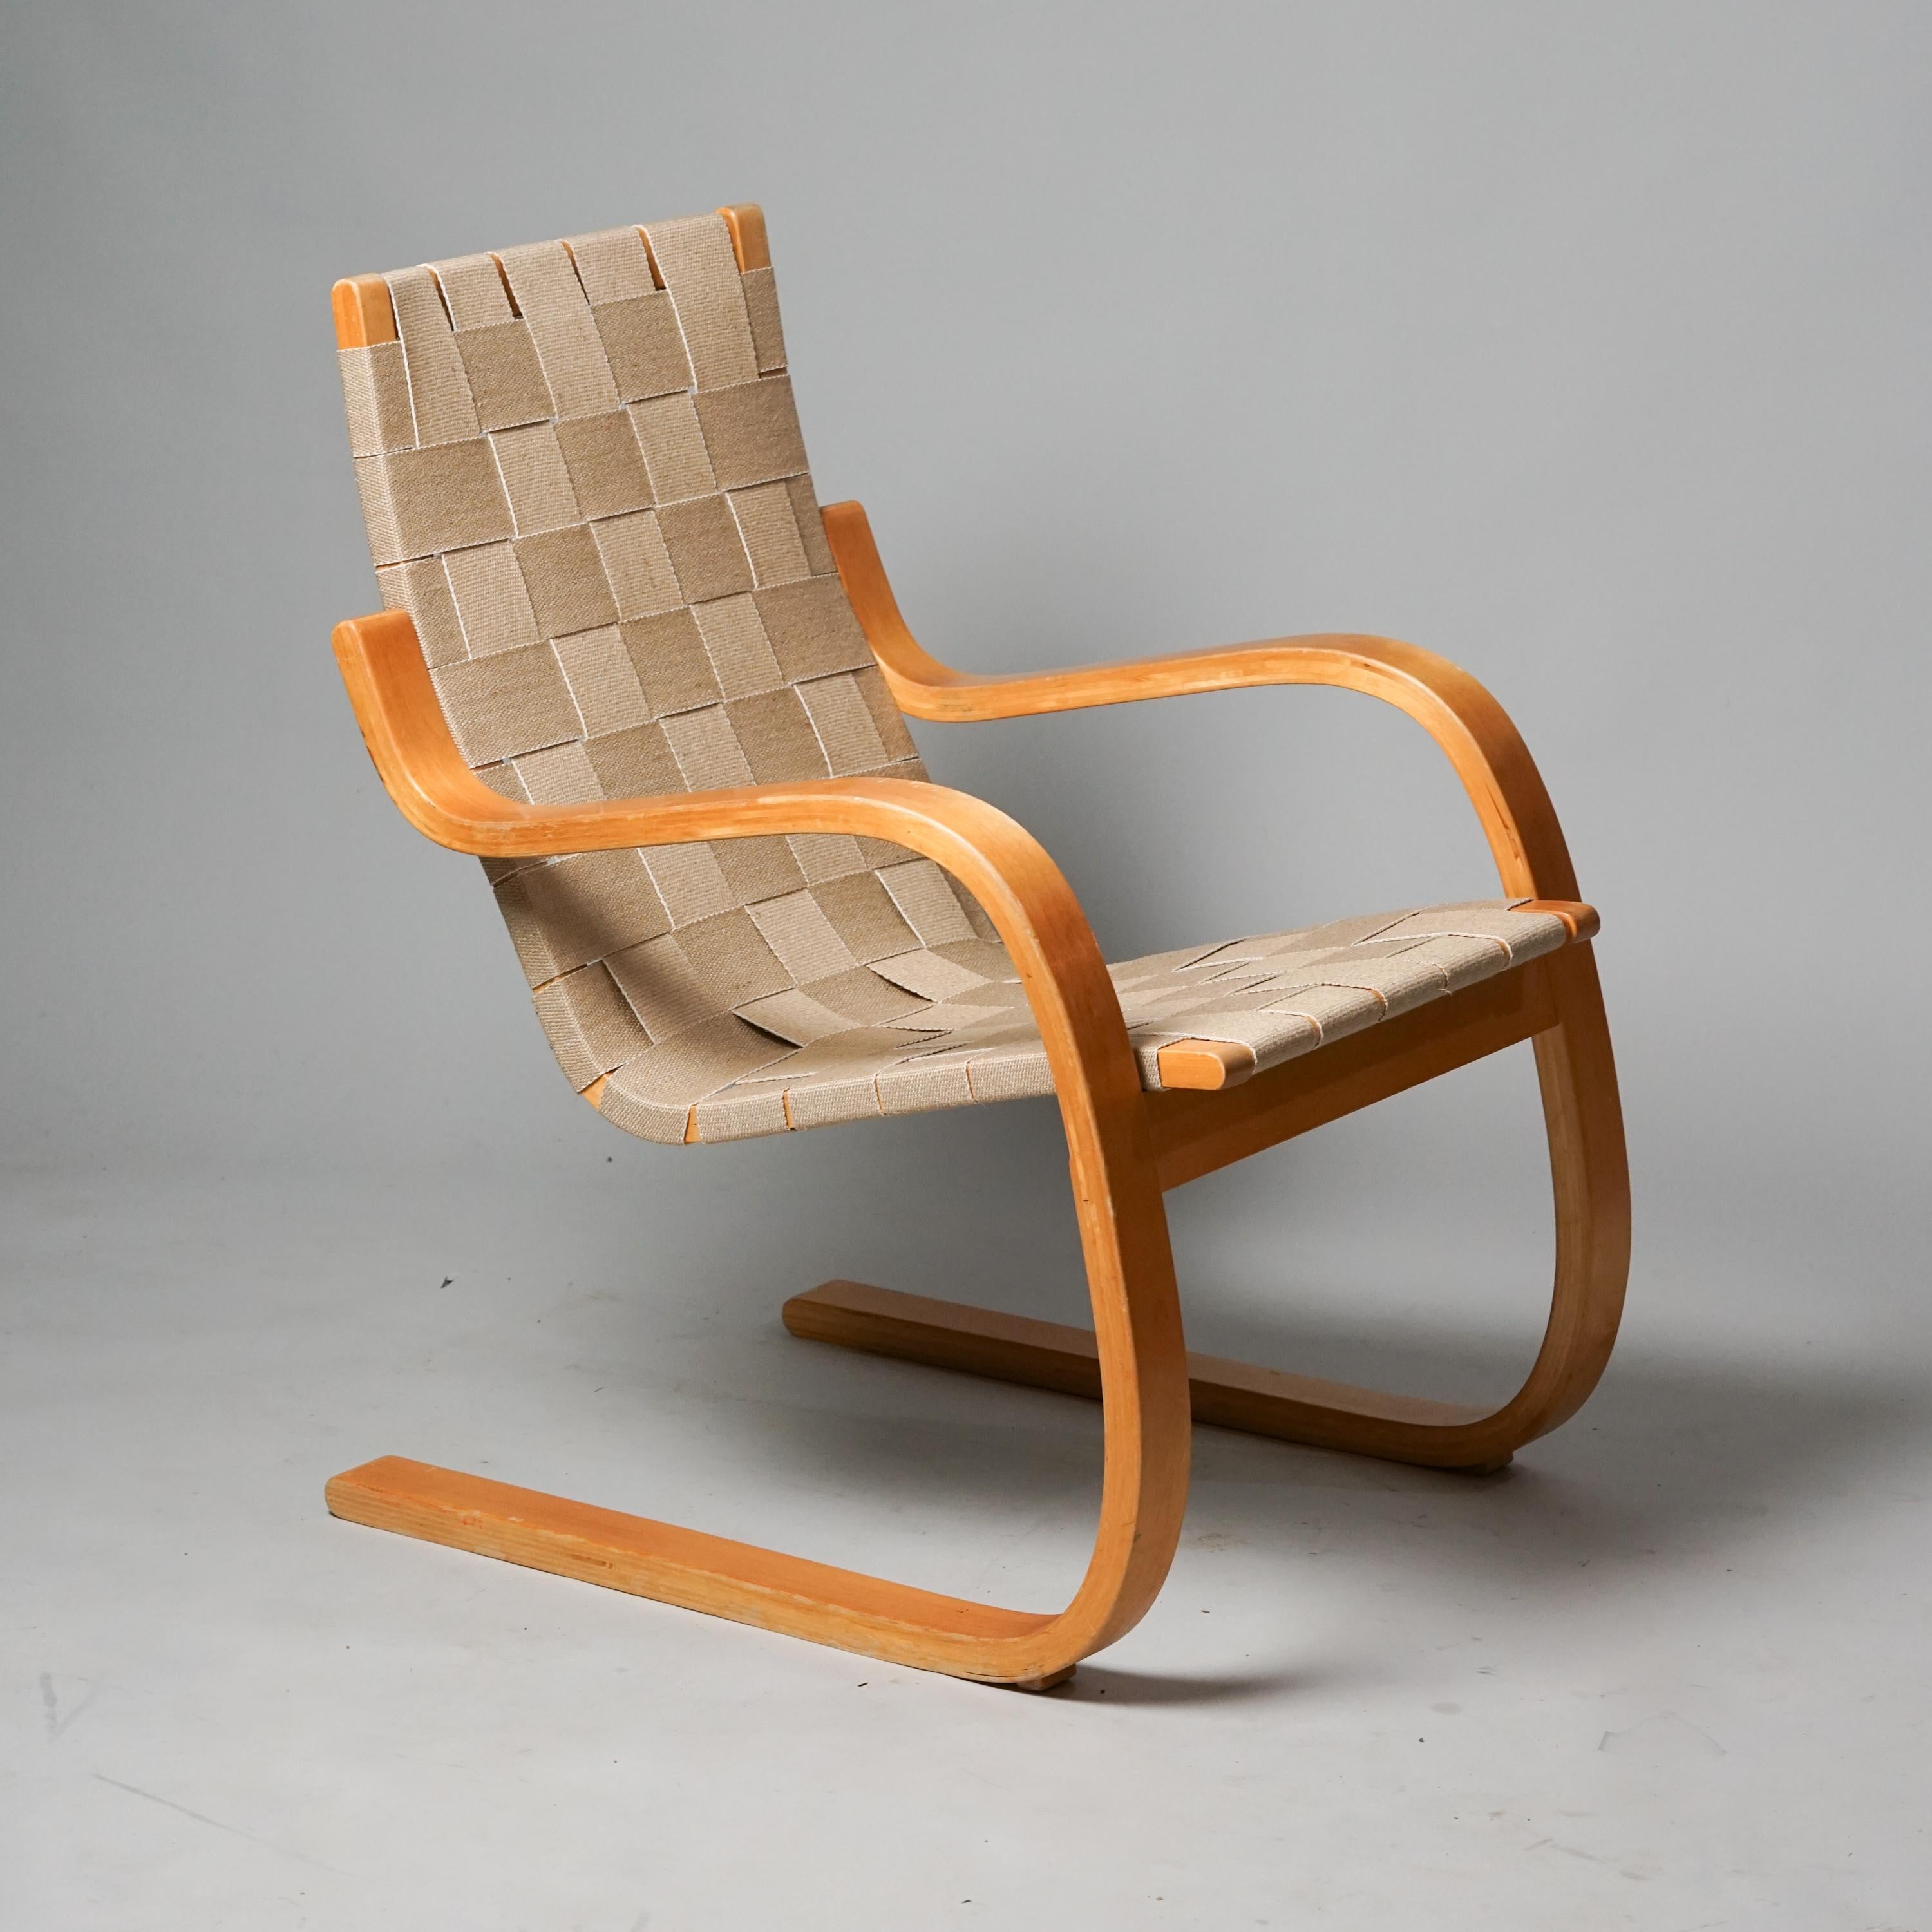 Rare model 30 armchair, designed by Alvar Aalto, manufactured by Oy Huonekalu- ja Rakennustyötehdas Ab, 1950s. Birch frame, cotton weaved seat. Good vintage condition, minor patina consistent with age and use. 

Alvar Aalto (1898-1976) is probably